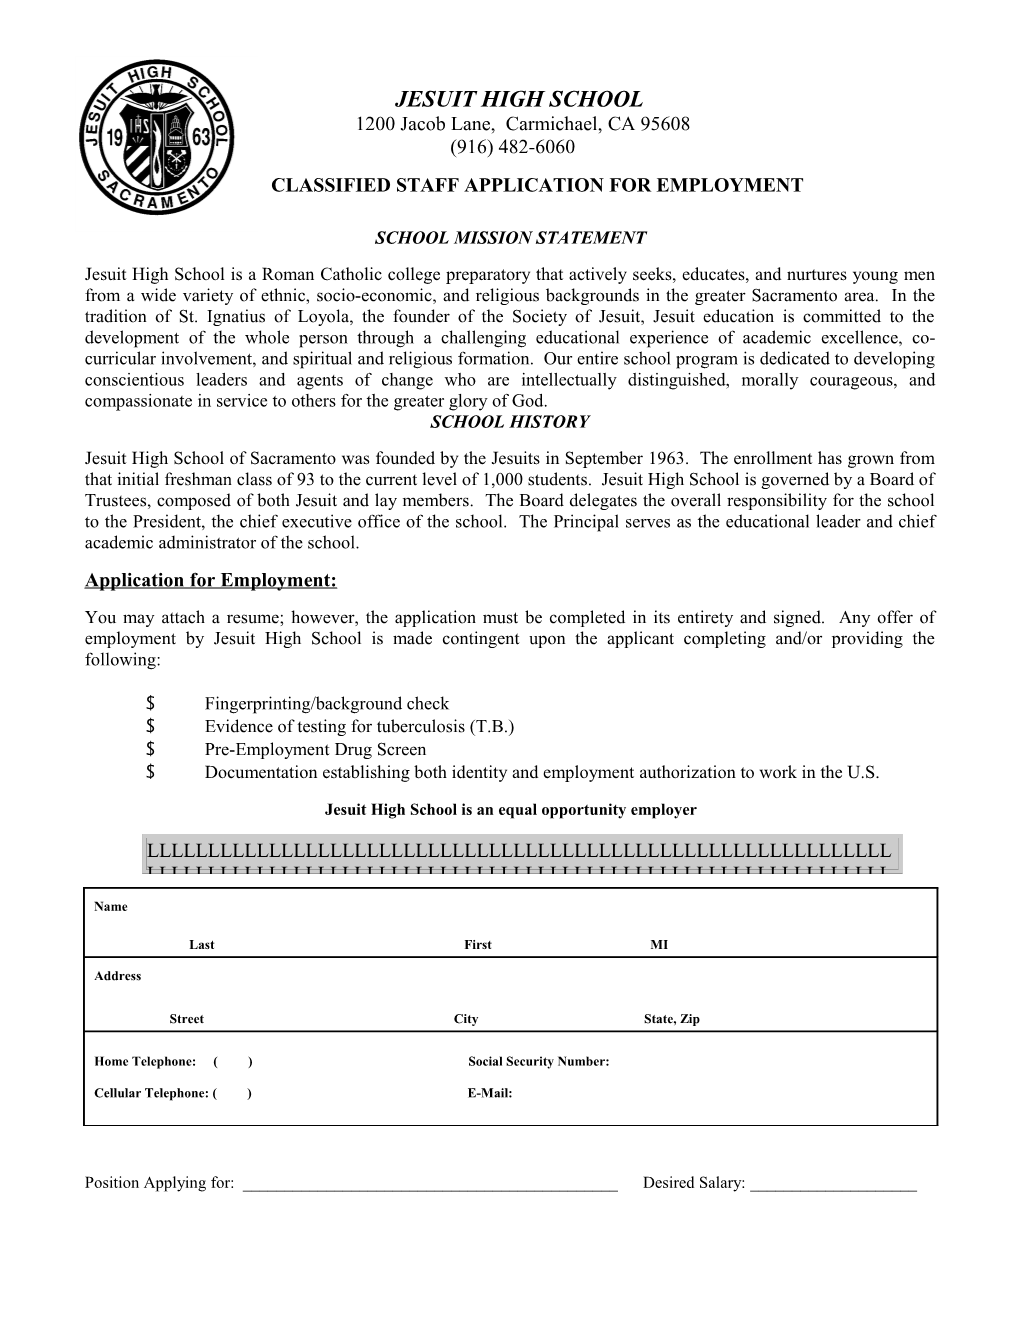 Classified Staff Application for Employment